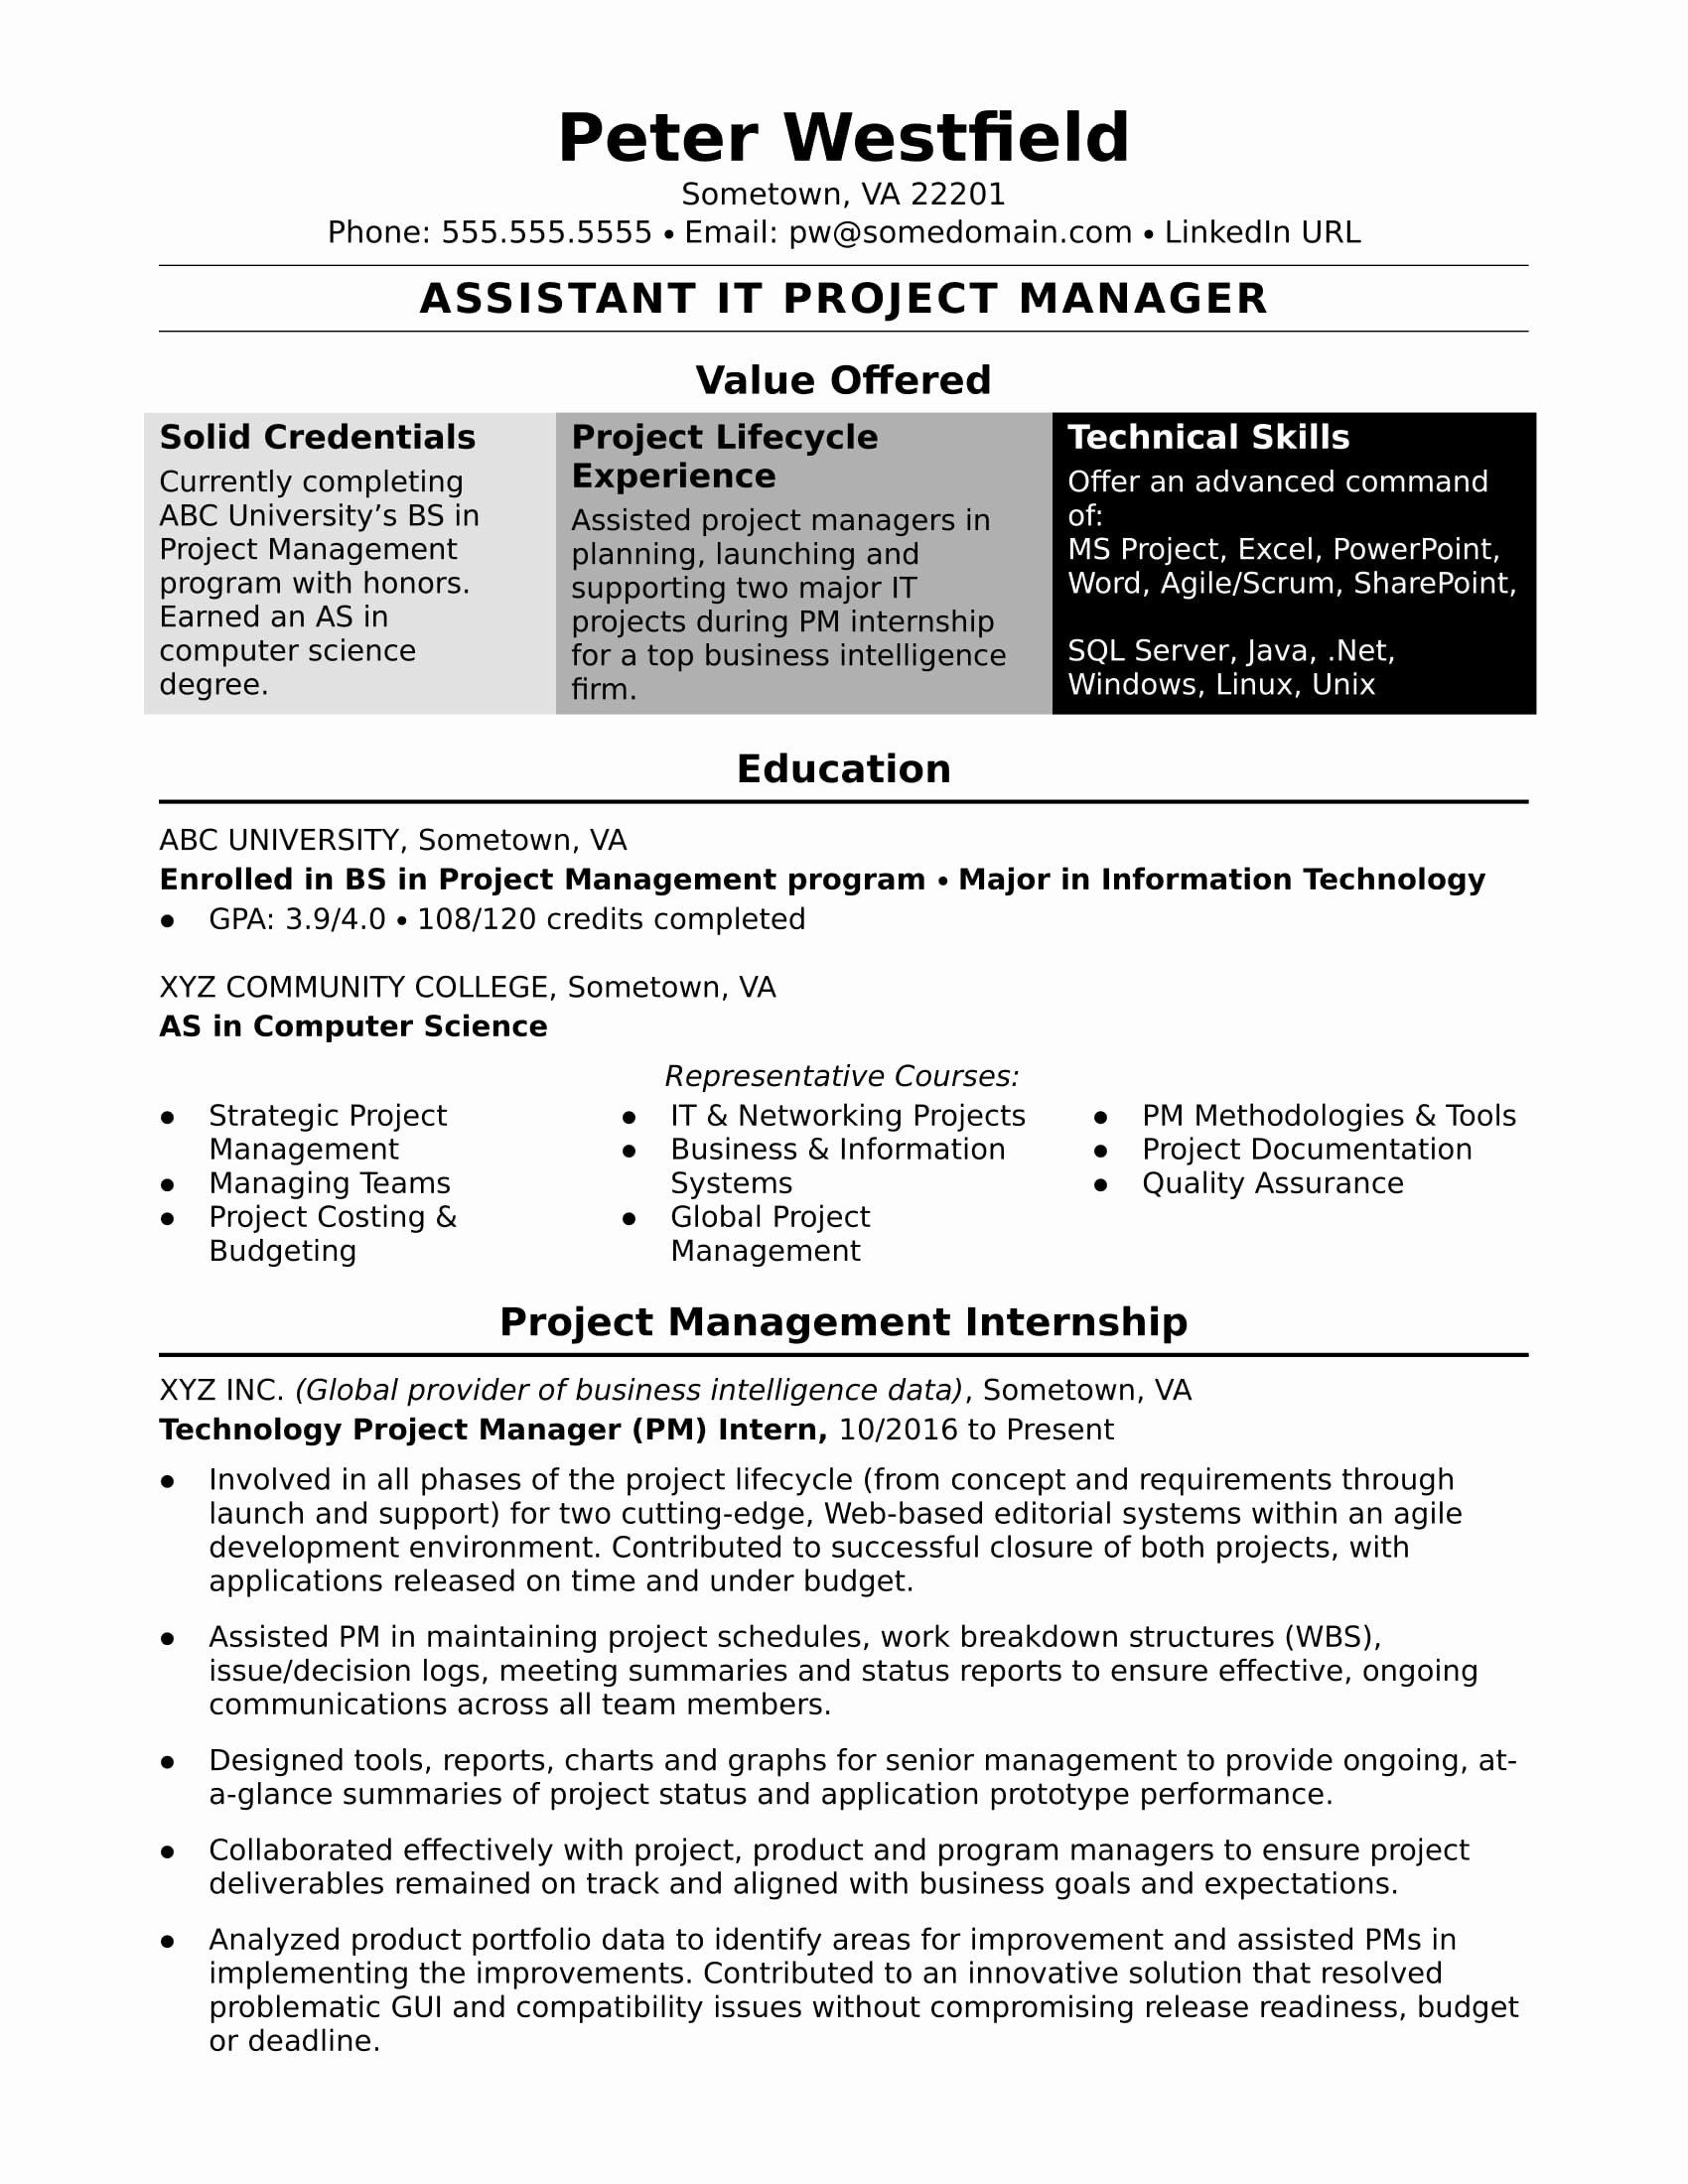 Project Manager Resume Template New Sample Resume for An assistant It Project Manager